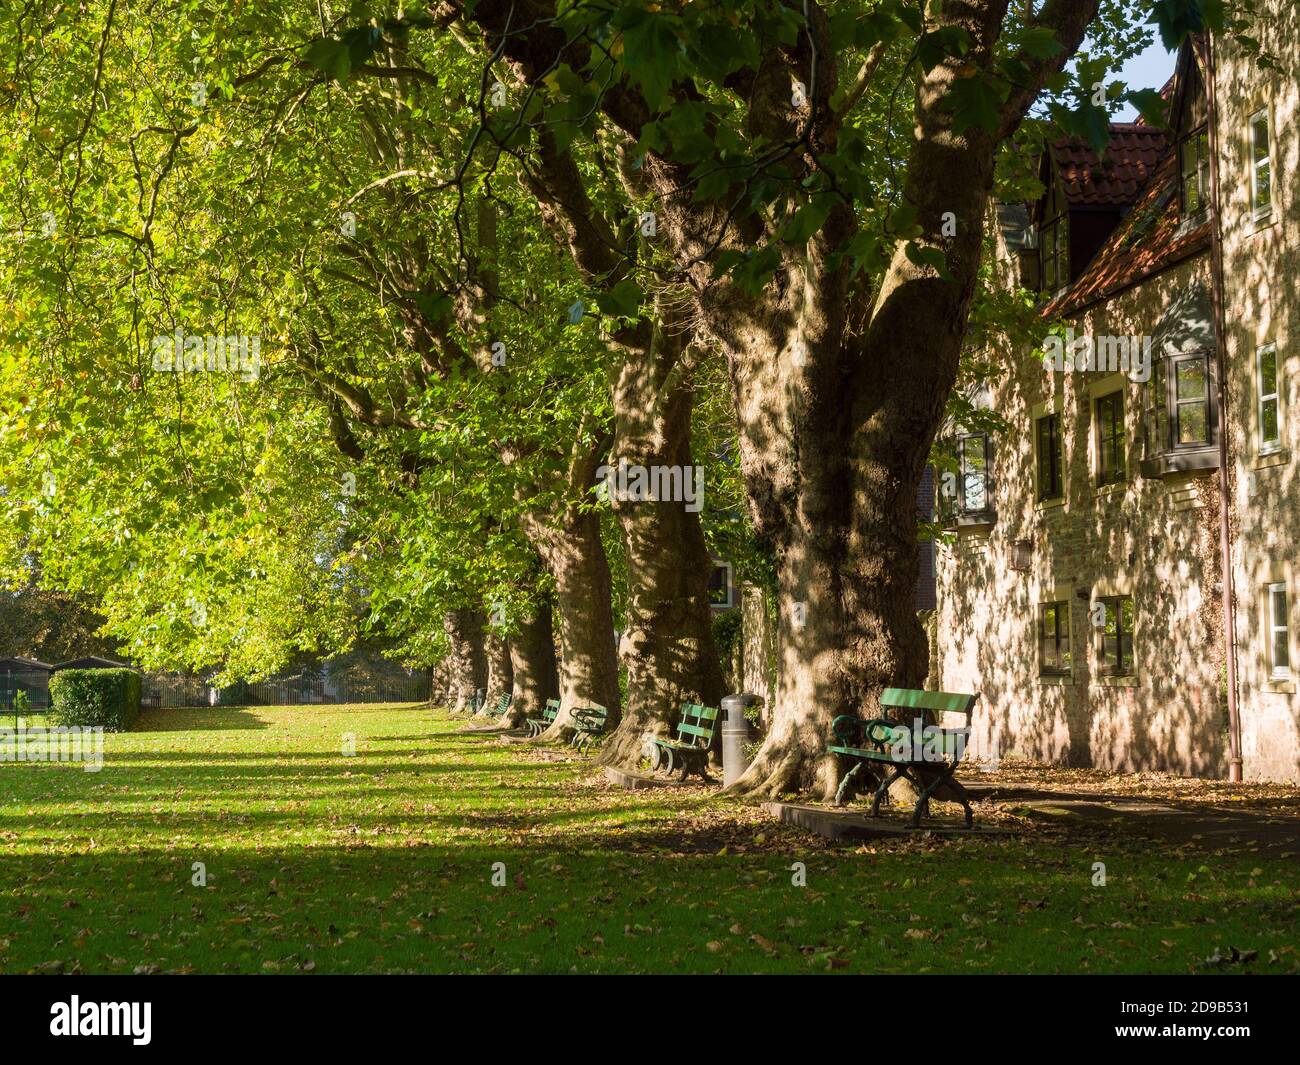 A row of sycamore (Acer pseudoplatanus) trees in the recreation ground in the city of Wells, Somerset, England. Stock Photo